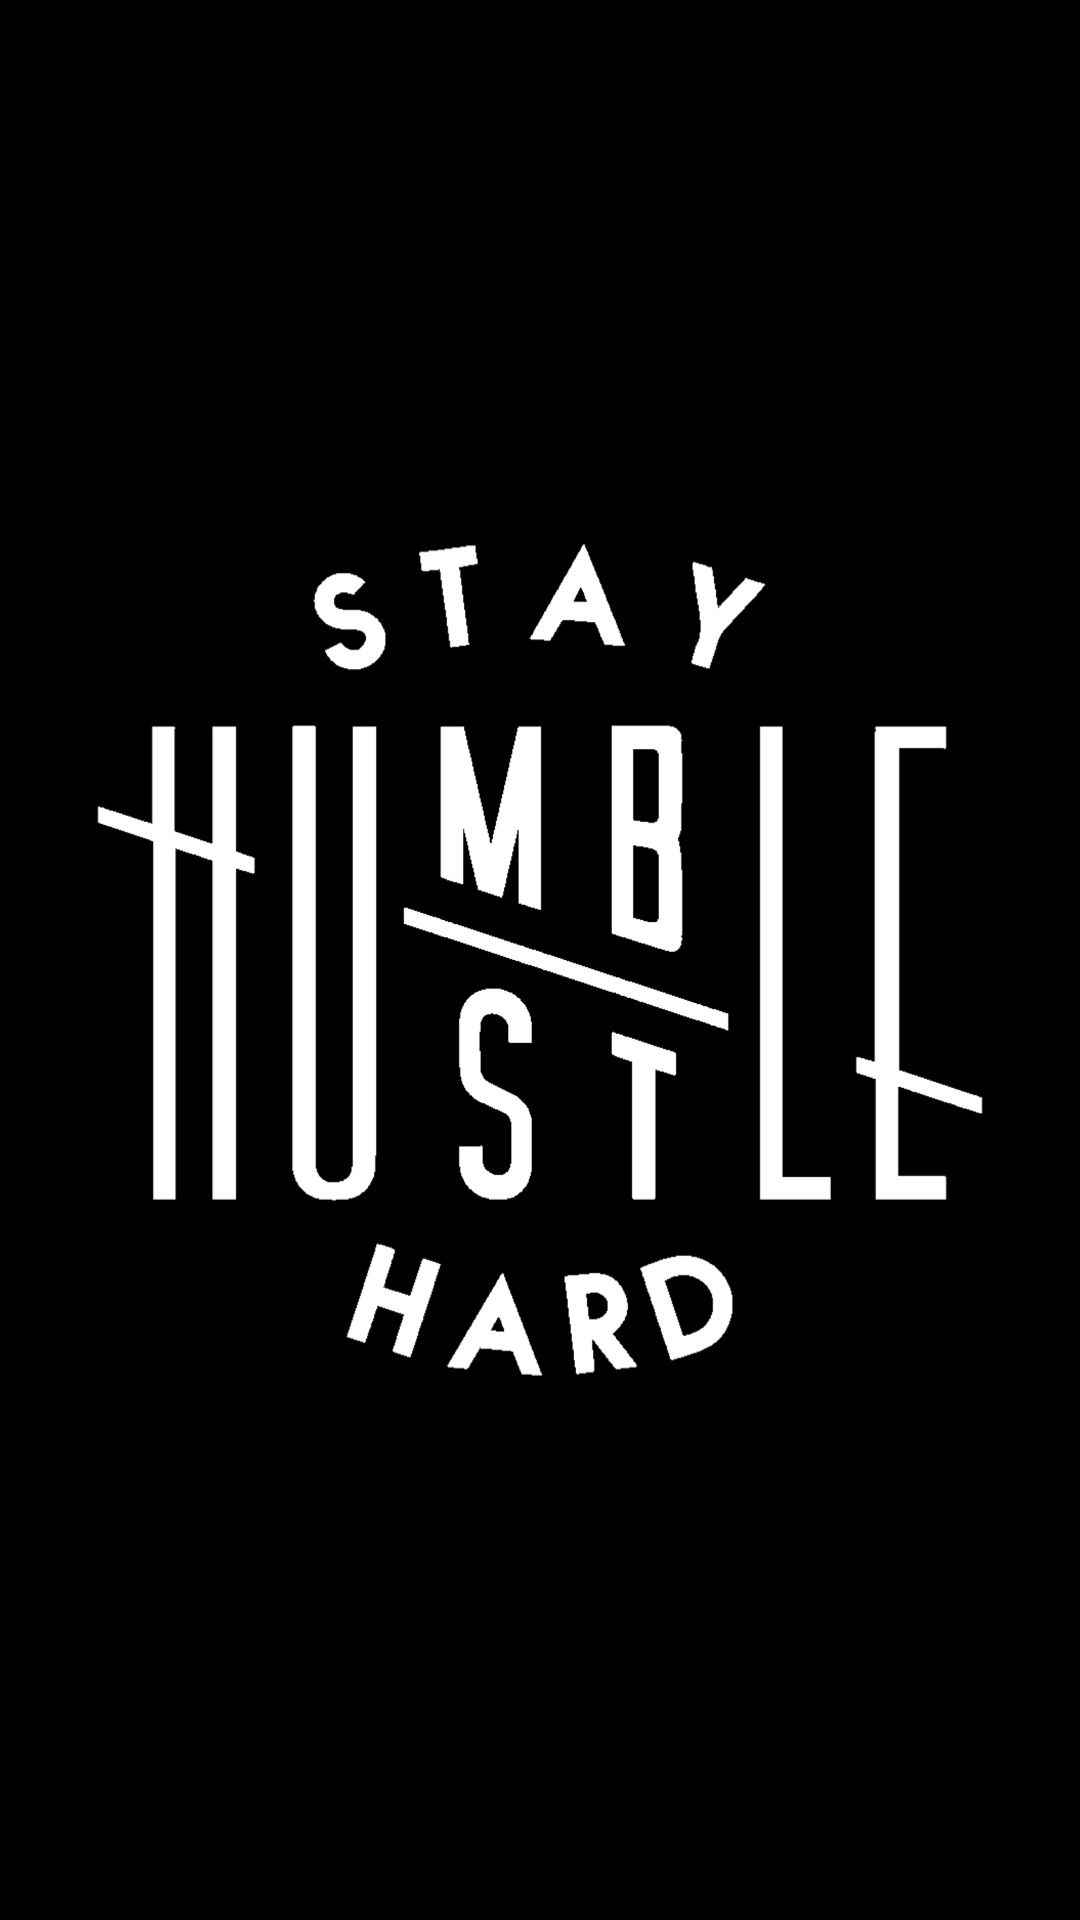 Stay Humble Hustle Hard. Humble quotes, Stay humble hustle hard, Stay humble quotes